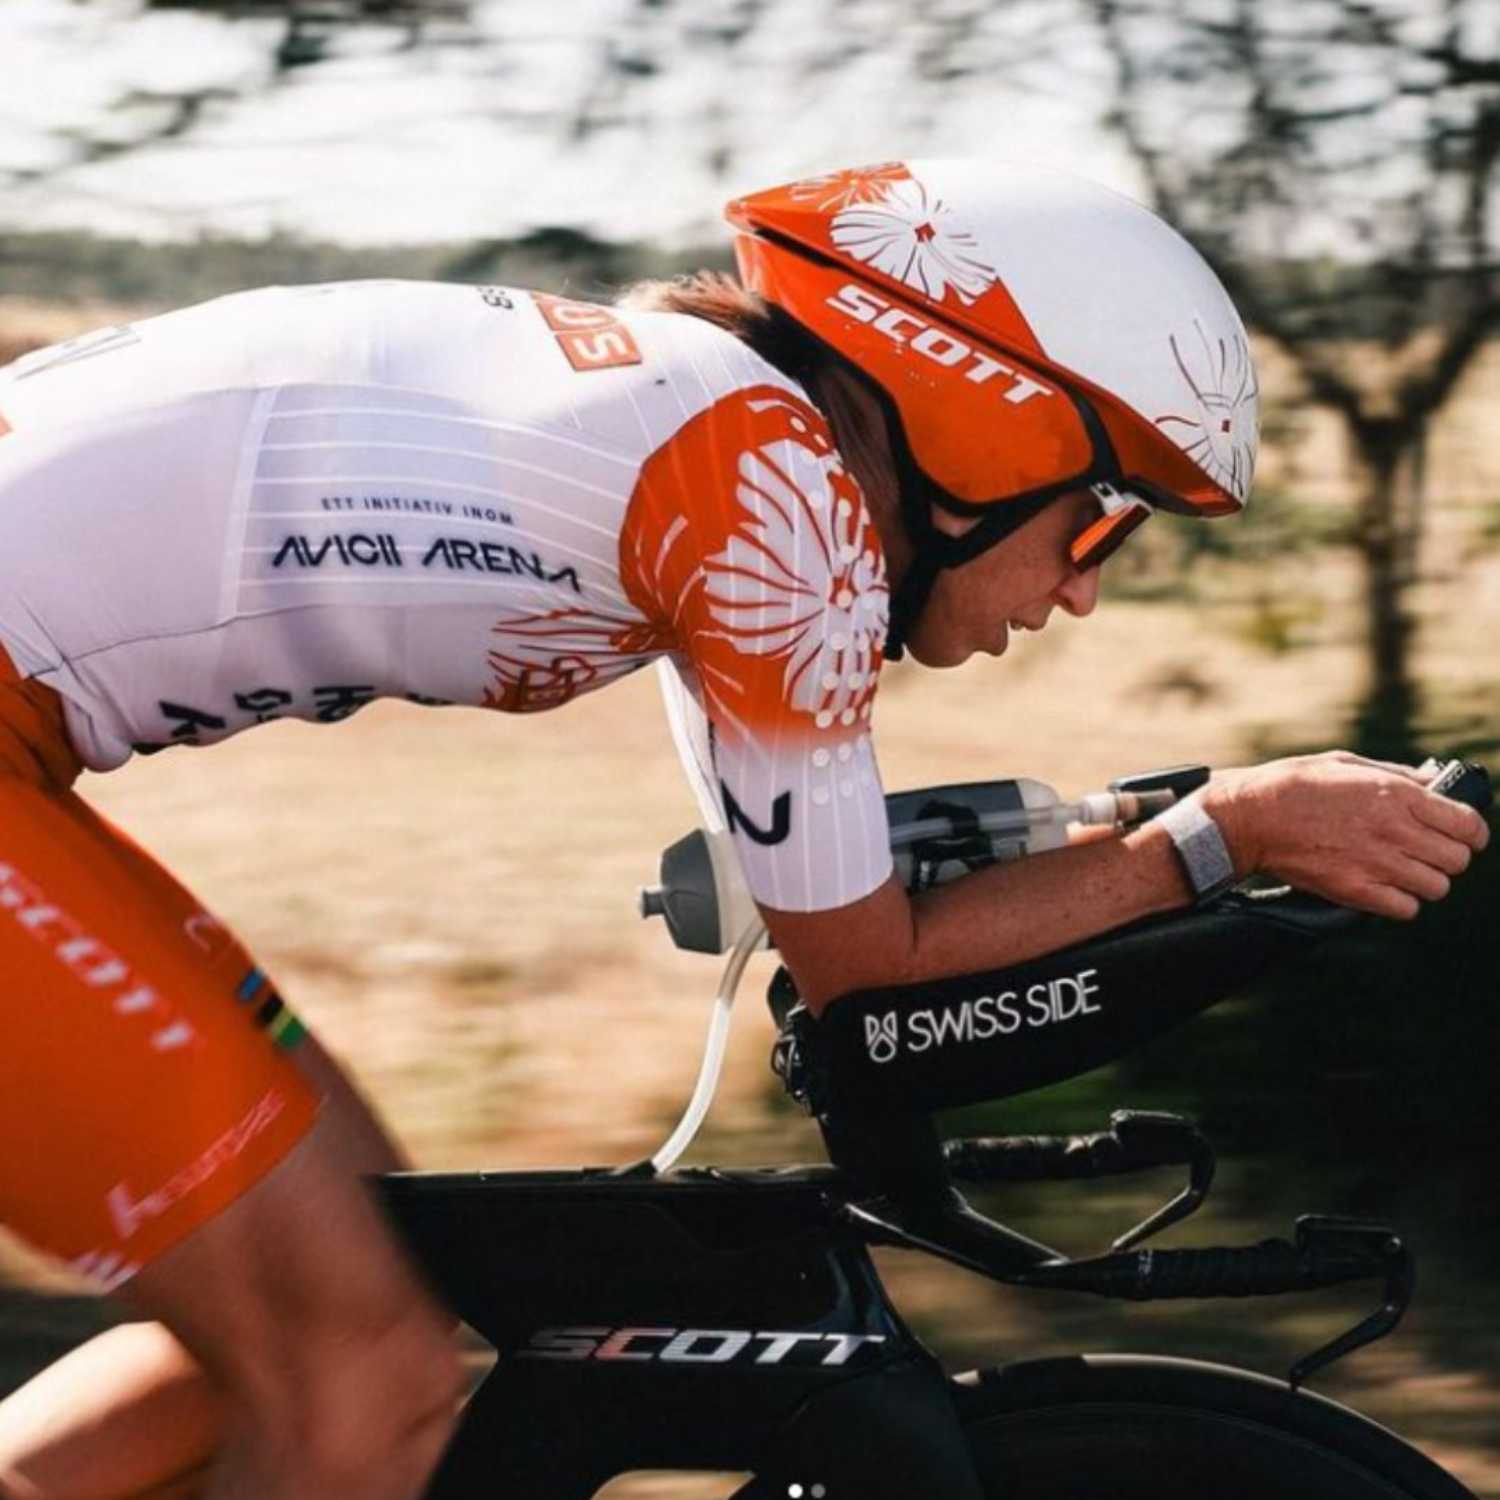 Lisa Norden joins Reedy and Clint to discuss her world record bike split at IM Busso, training, recovery, racing in 2024 and all things triathlon